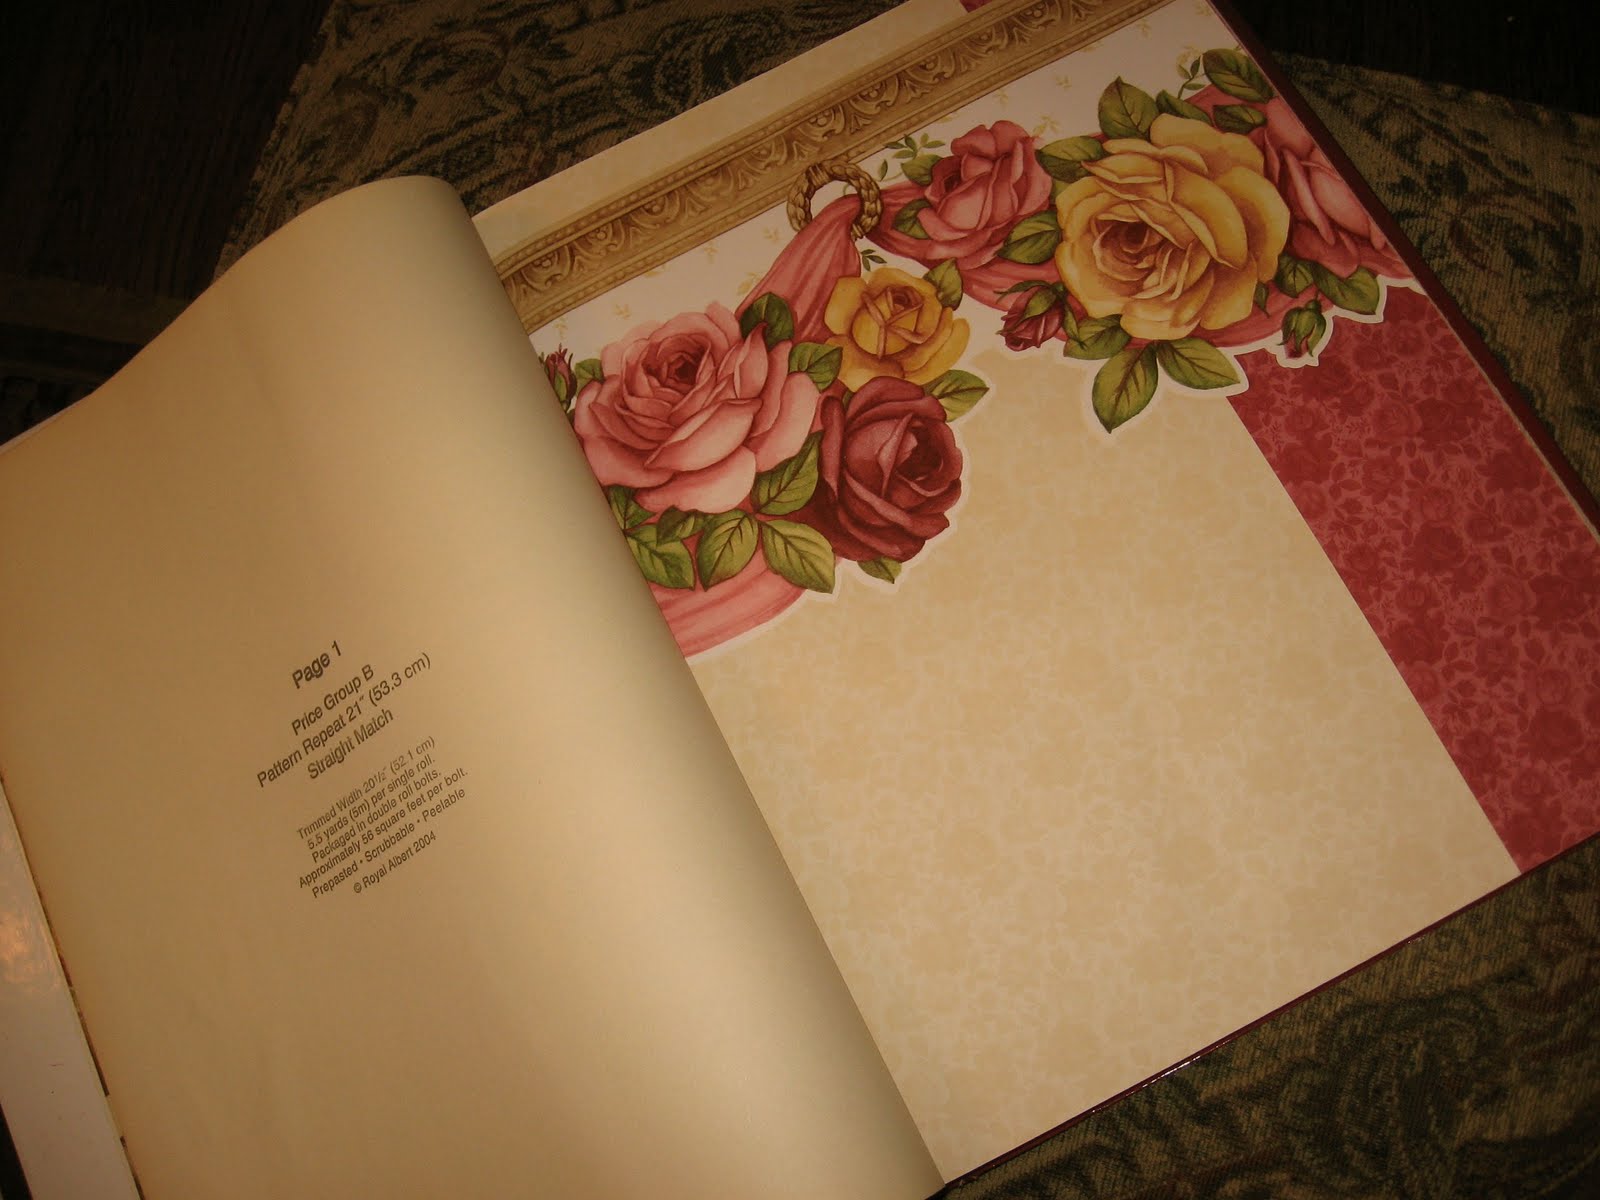 Discontinued Wallpaper Books For Sale